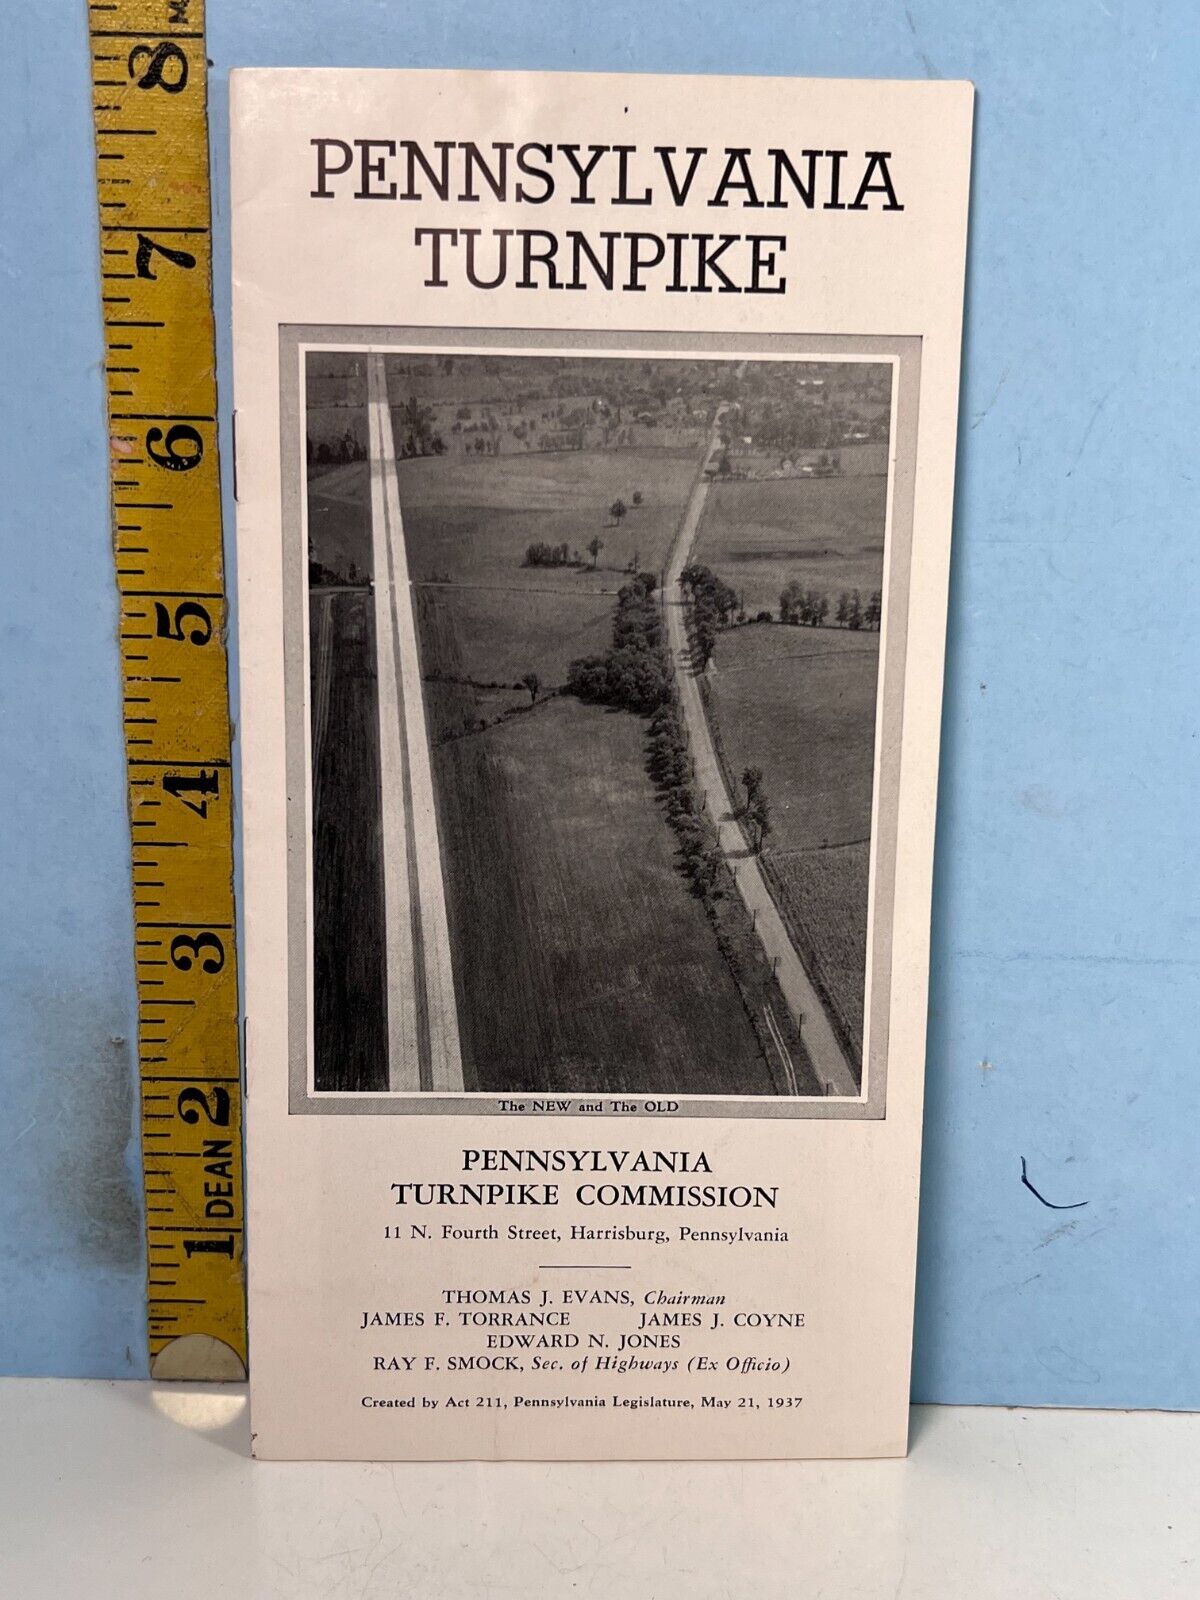 1937 Pennsylvania Turnpike Commission The New & The Old Map Brochure